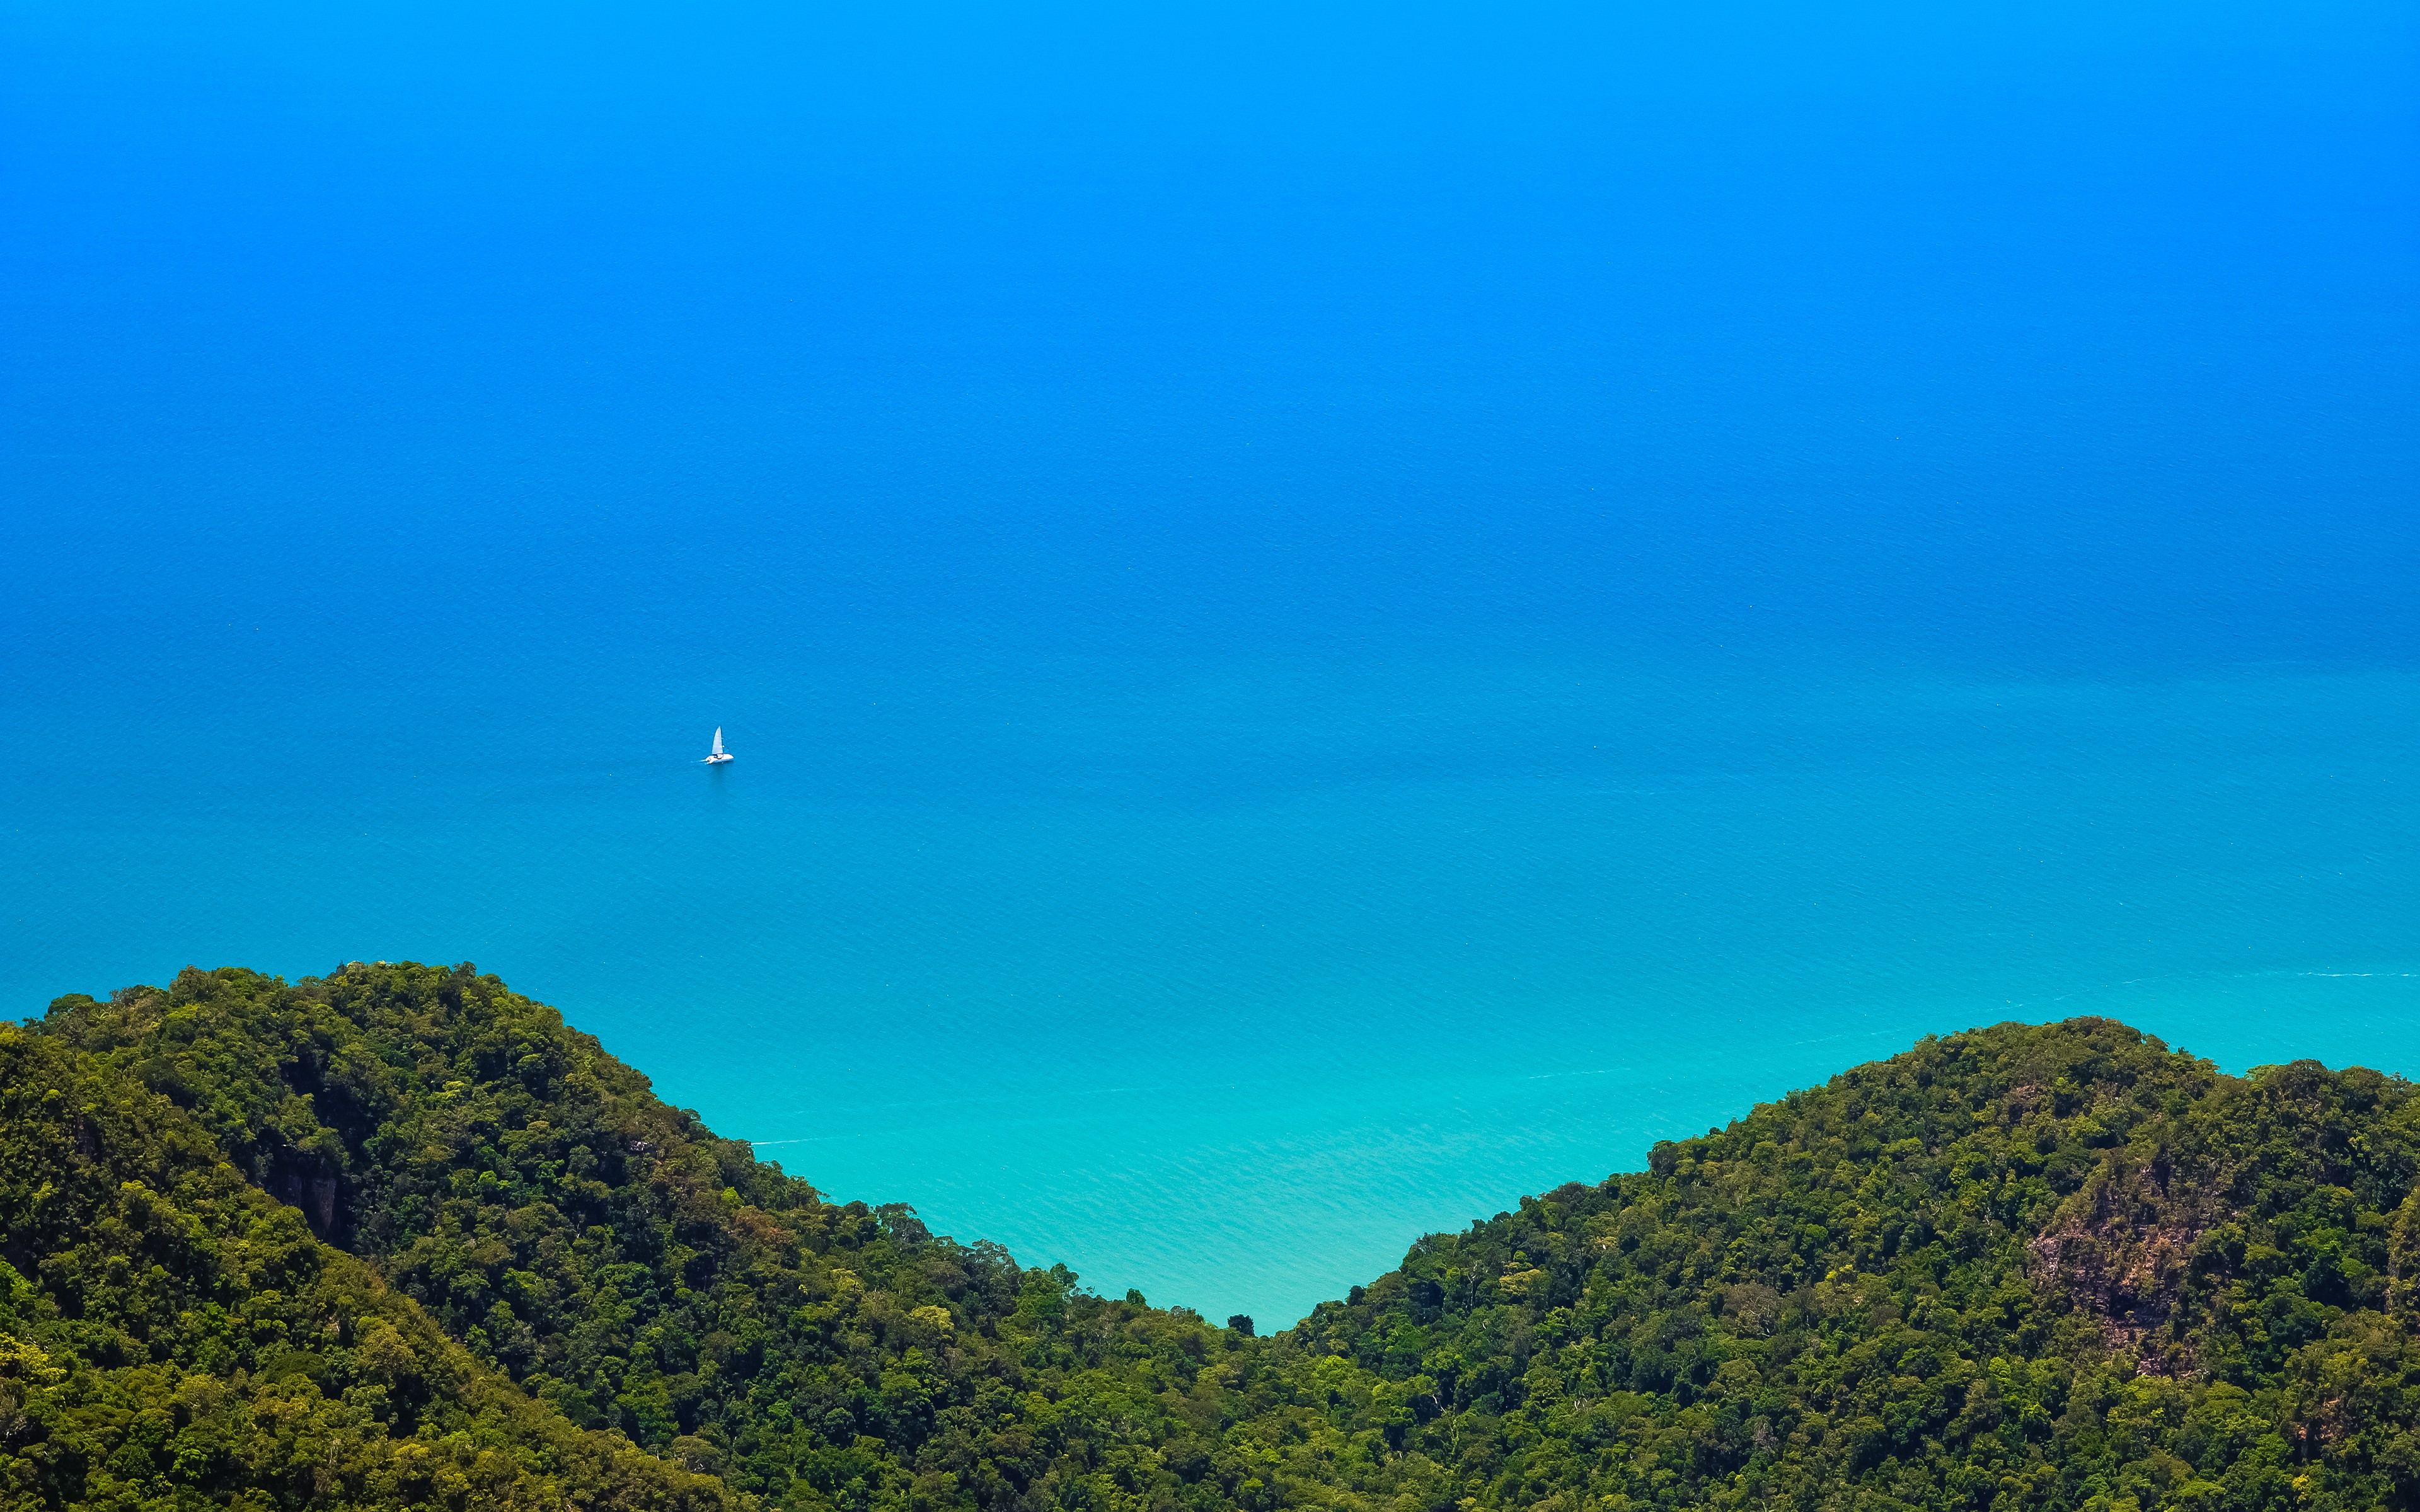 General 3840x2400 nature landscape sea trees forest hills sailing ship boat Langkawi Malaysia